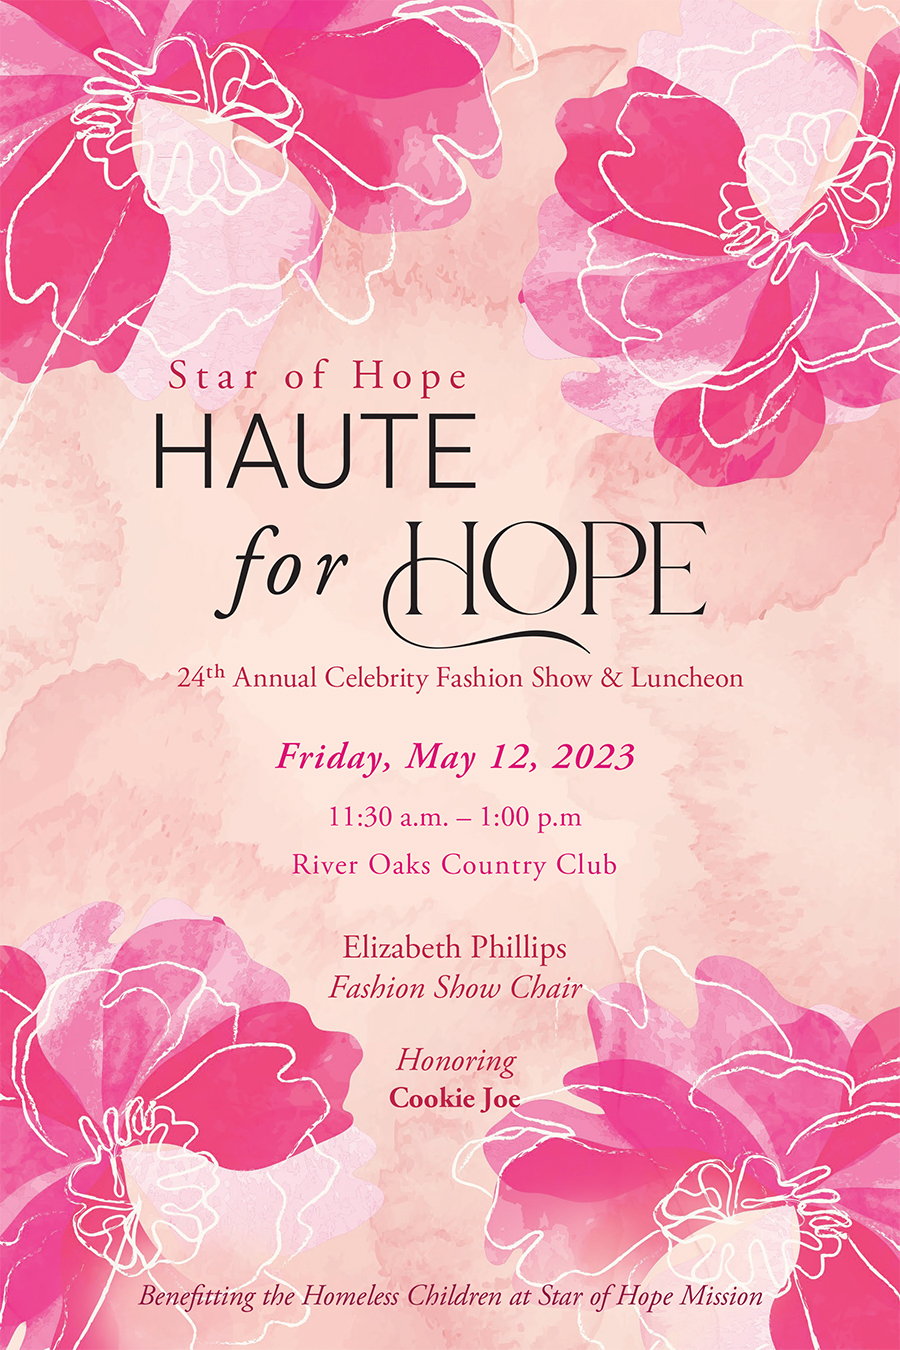 Haute for Hope Save the Date RC Adj-small RGB 2.jpg